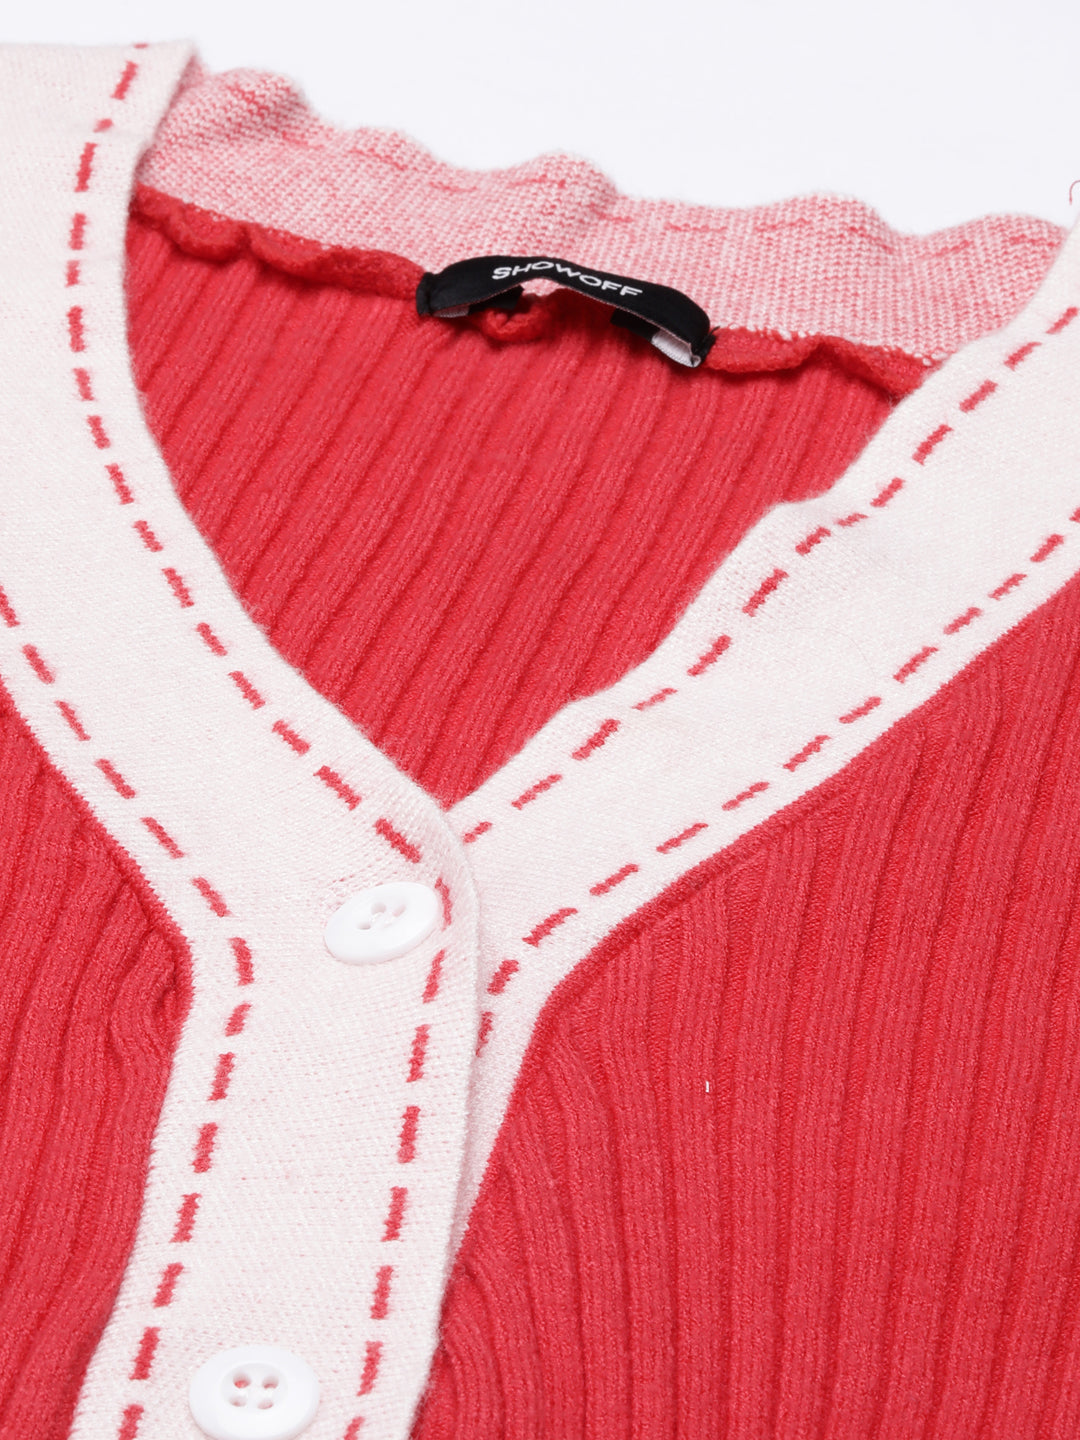 Women Coral Solid Vest Sweater